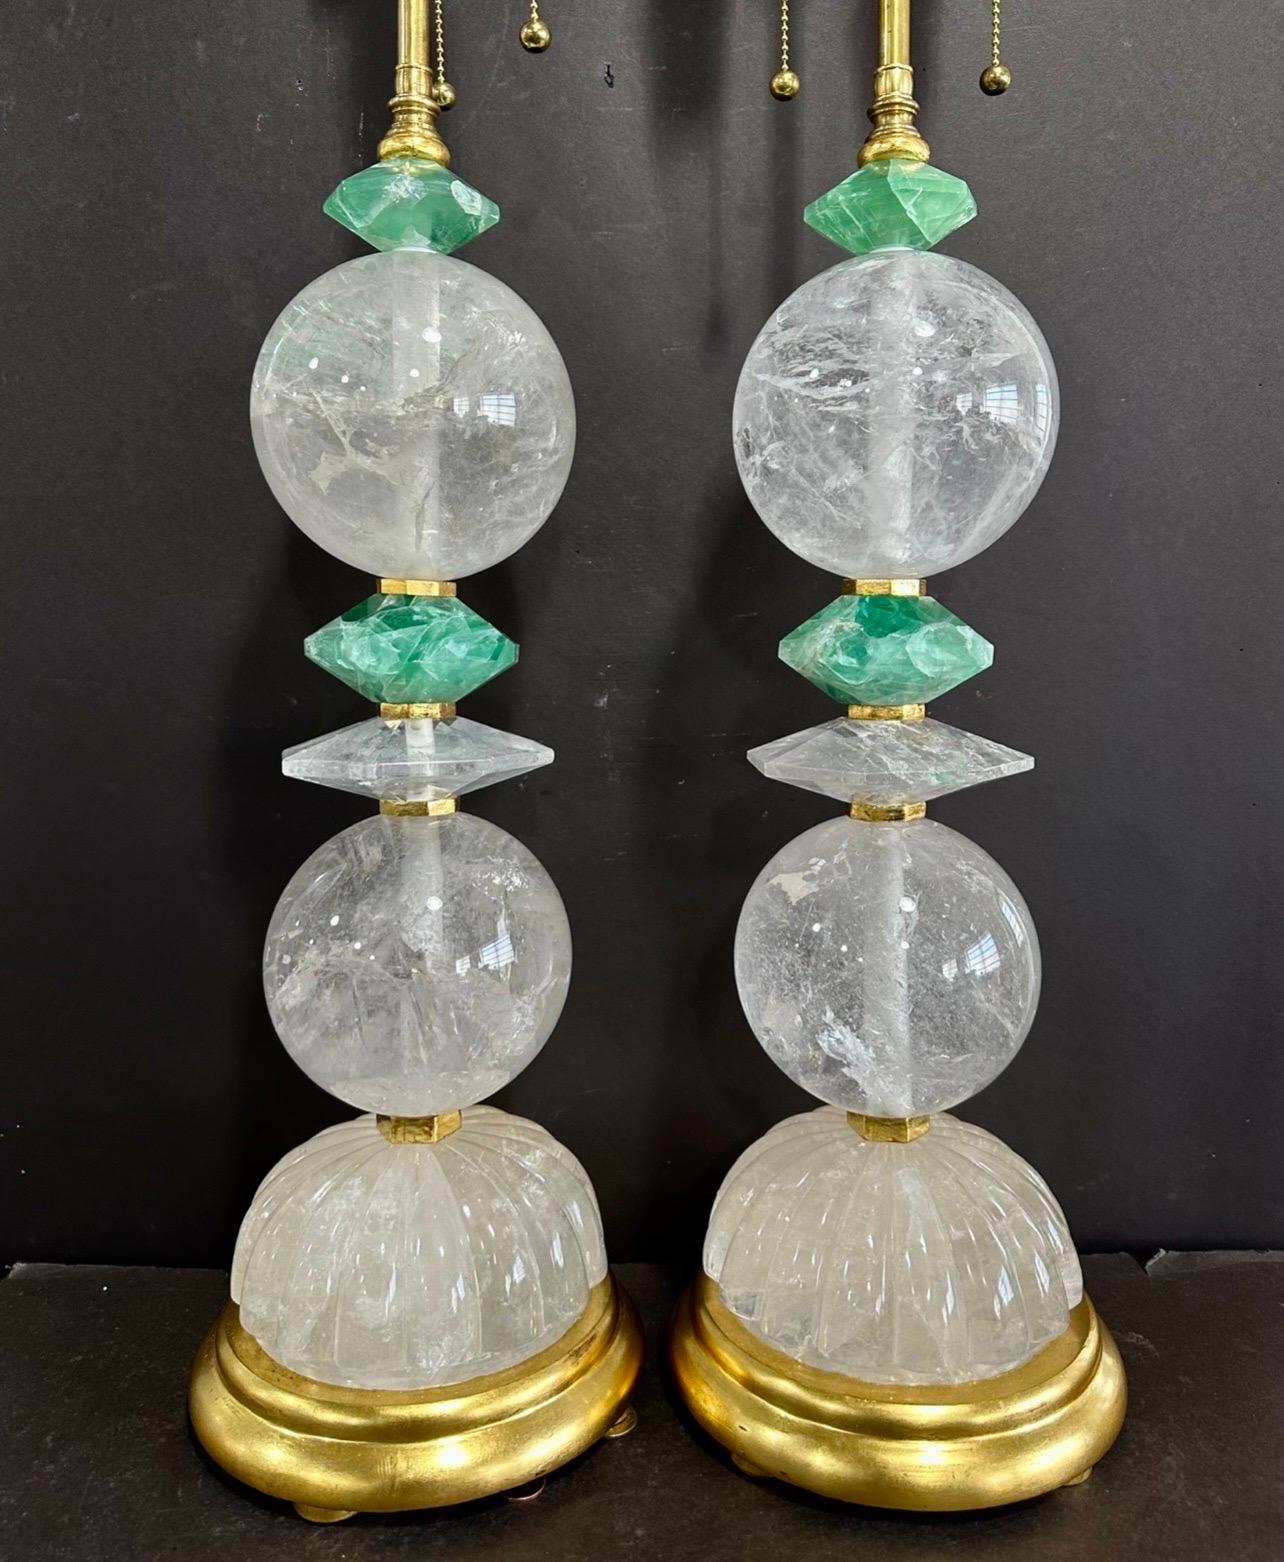 A Wonderful Pair Of Mid Century Modern Style Rock Crystal And Alternating Green Quartz Crystal Lamps On Gold Leaf  Bases, Completely Rewired With New Sockets.